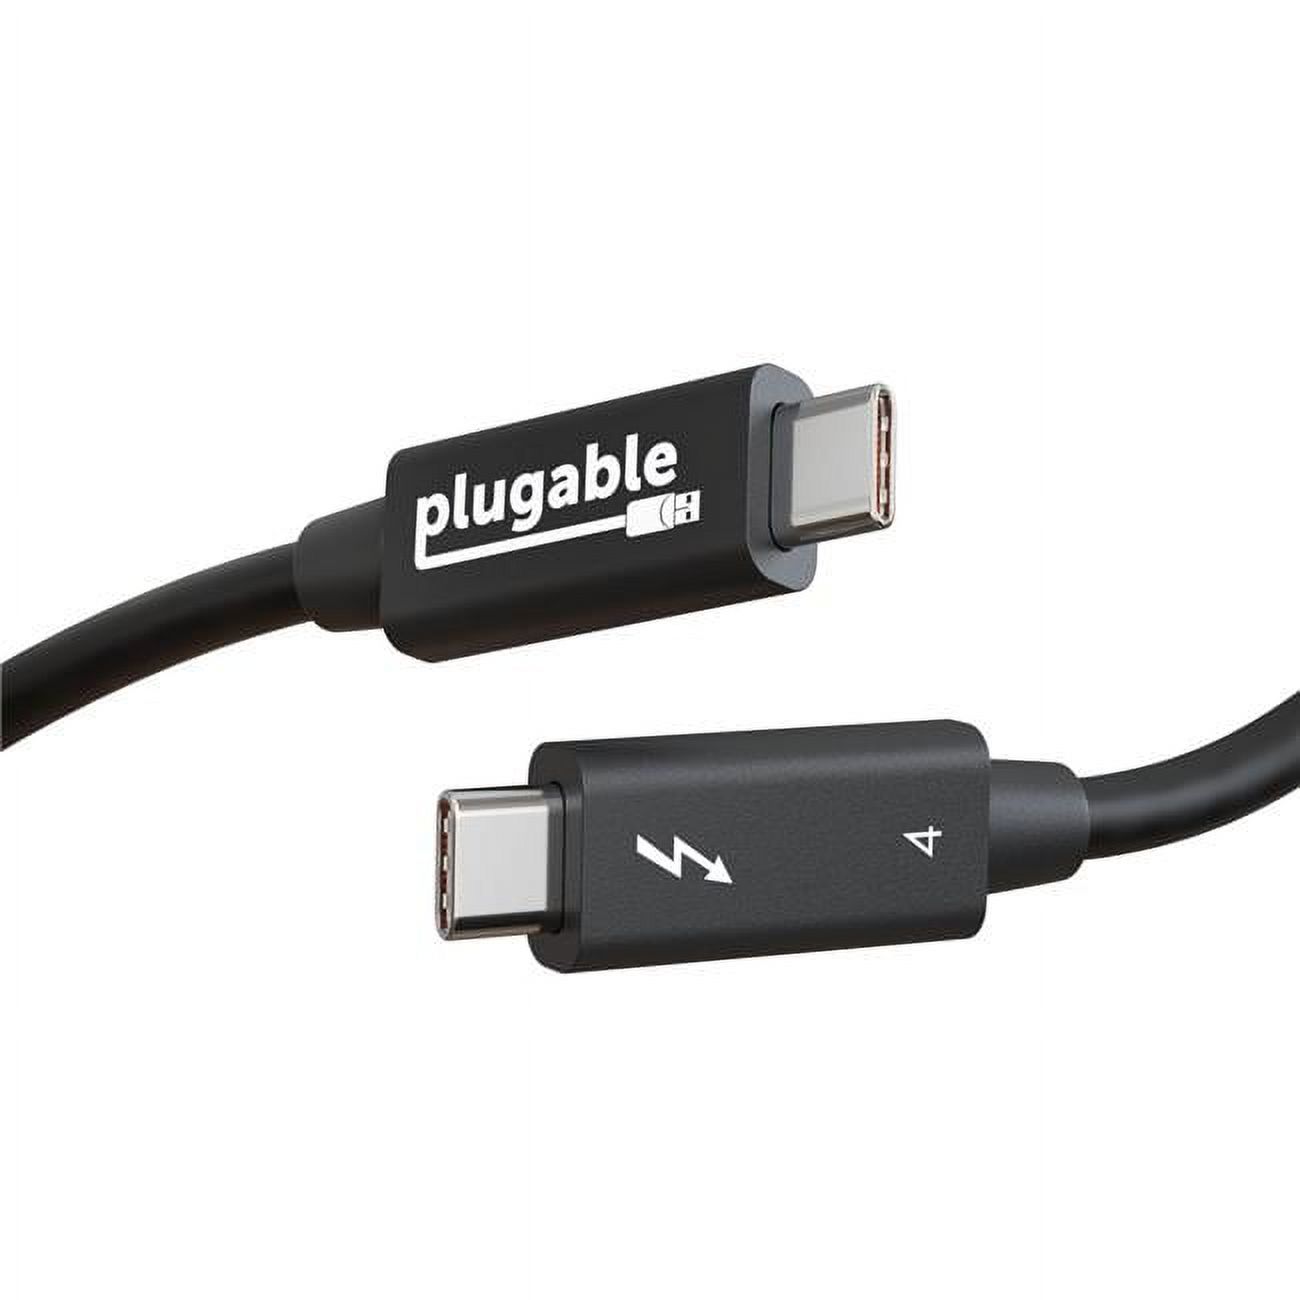 Plugable Thunderbolt 4 Cable [Thunderbolt Certified] 3.2ft USB4 Cable with 100W Charging, Single 8K or Dual 4K Displays, 40Gbps Data Transfer, Compatible with Thunderbolt 4, USB4, Thunderbolt 3, USB-C - image 1 of 7